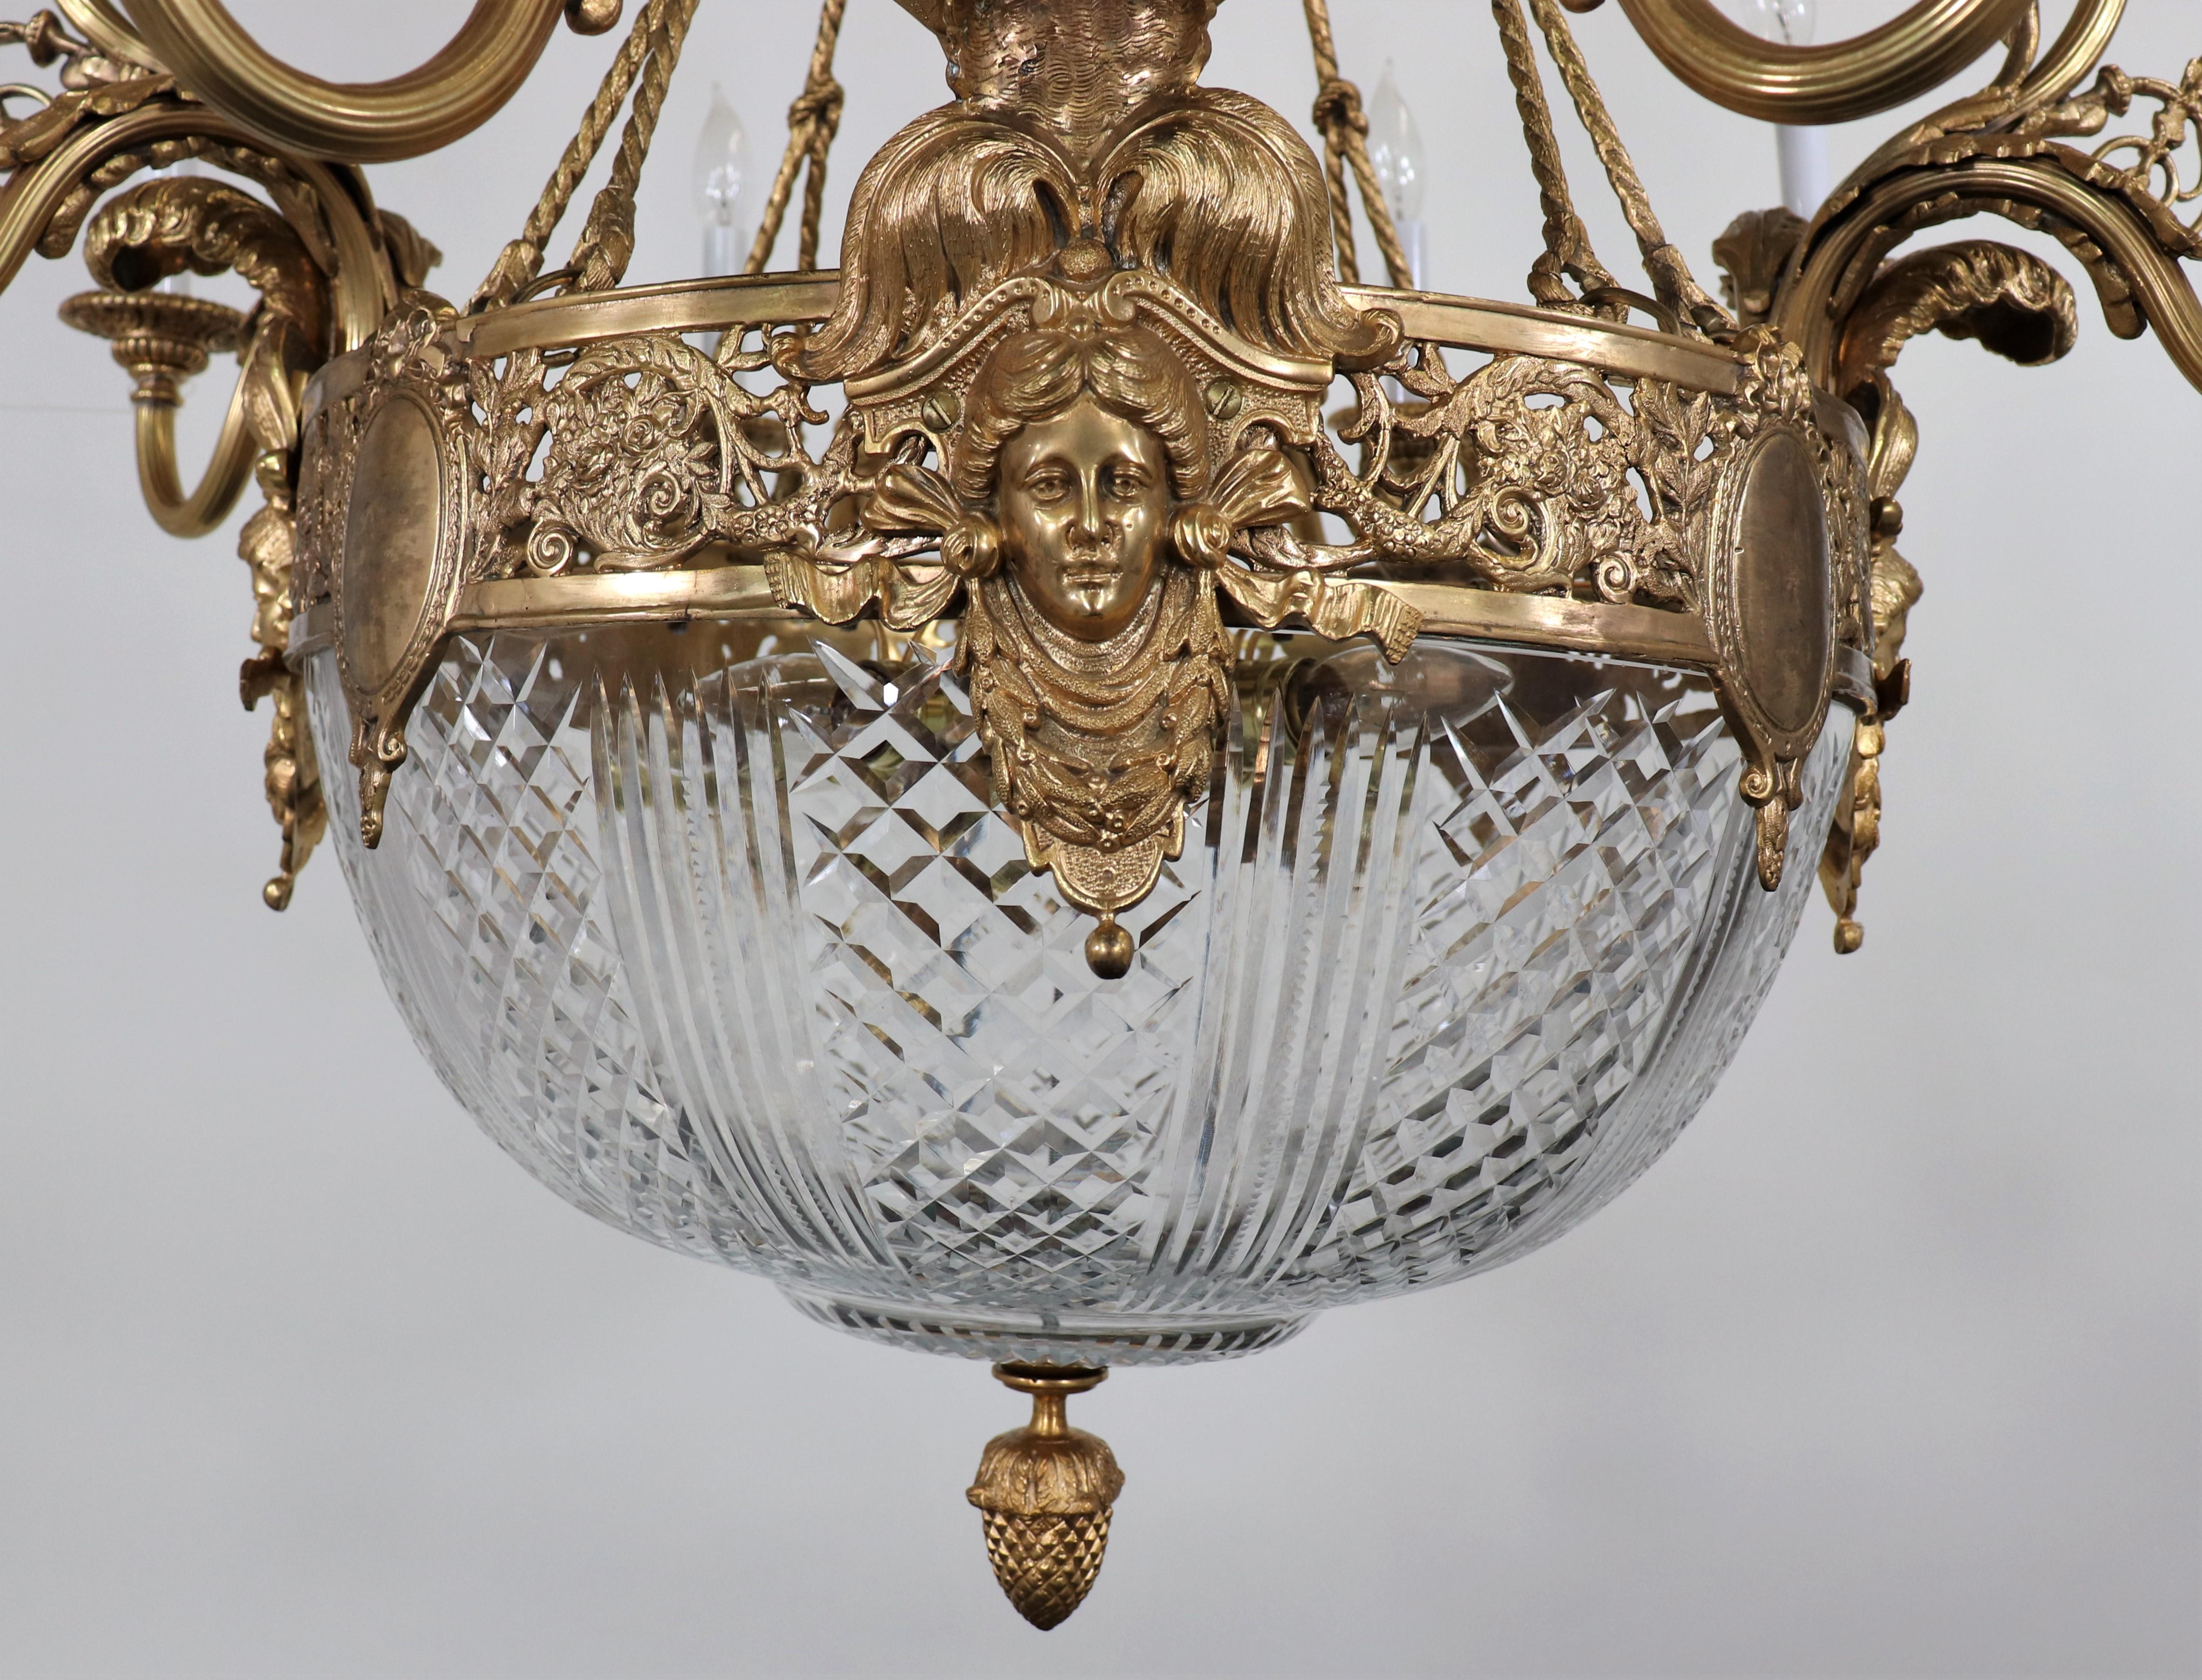 Circa 1910 French Beaux-Arts Gilt Bronze Chandelier For Sale 4